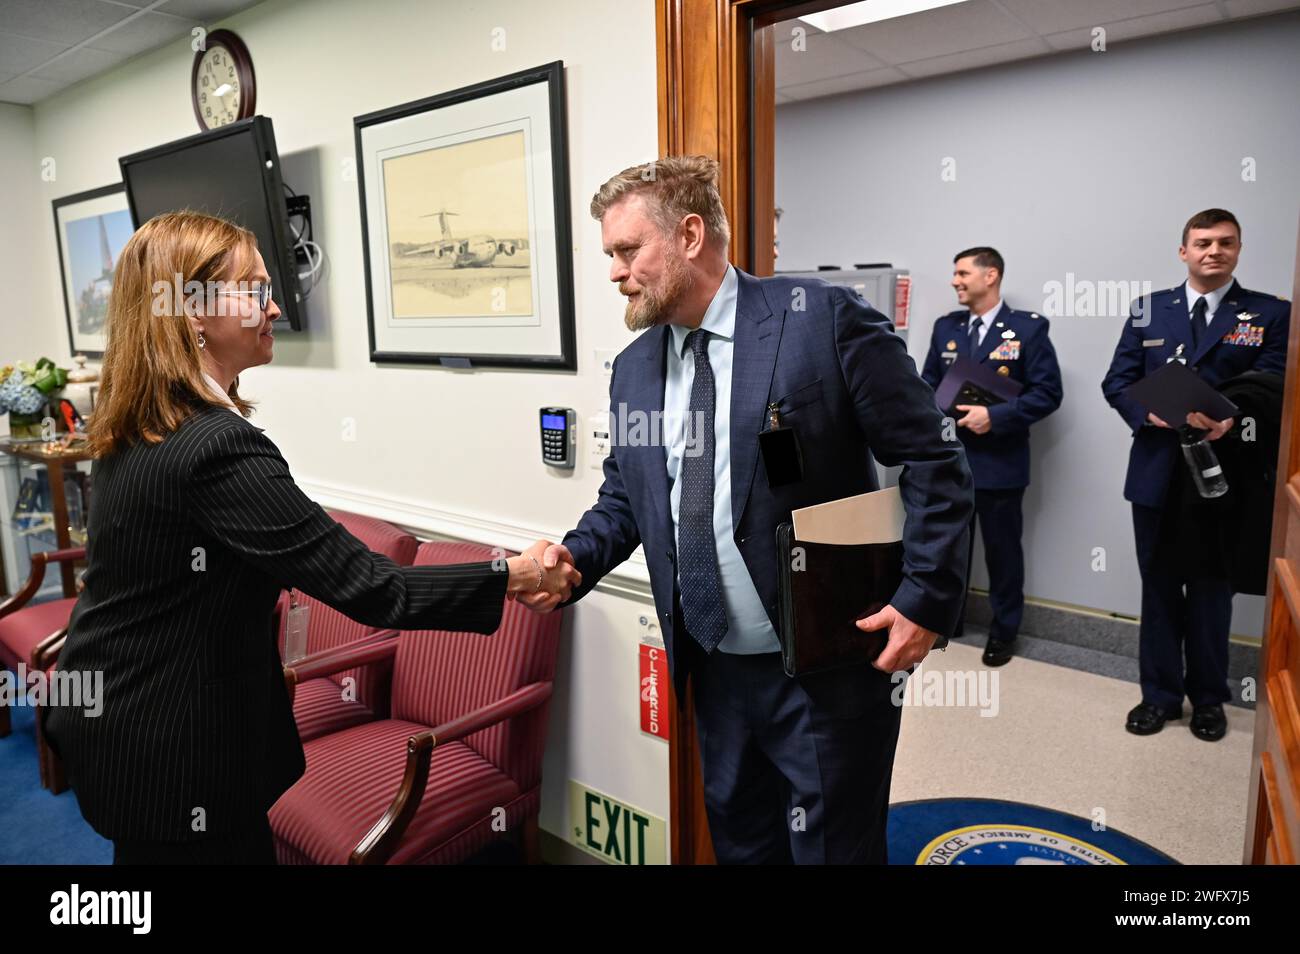 Kelli Seybolt, deputy undersecretary of the Air Force for international affairs, greets Iceland Chief of Defence Jónas Allansson before a meeting at the Pentagon, Arlington, Va., Jan. 22, 2024. This image has been altered to obscure security badges. Stock Photo